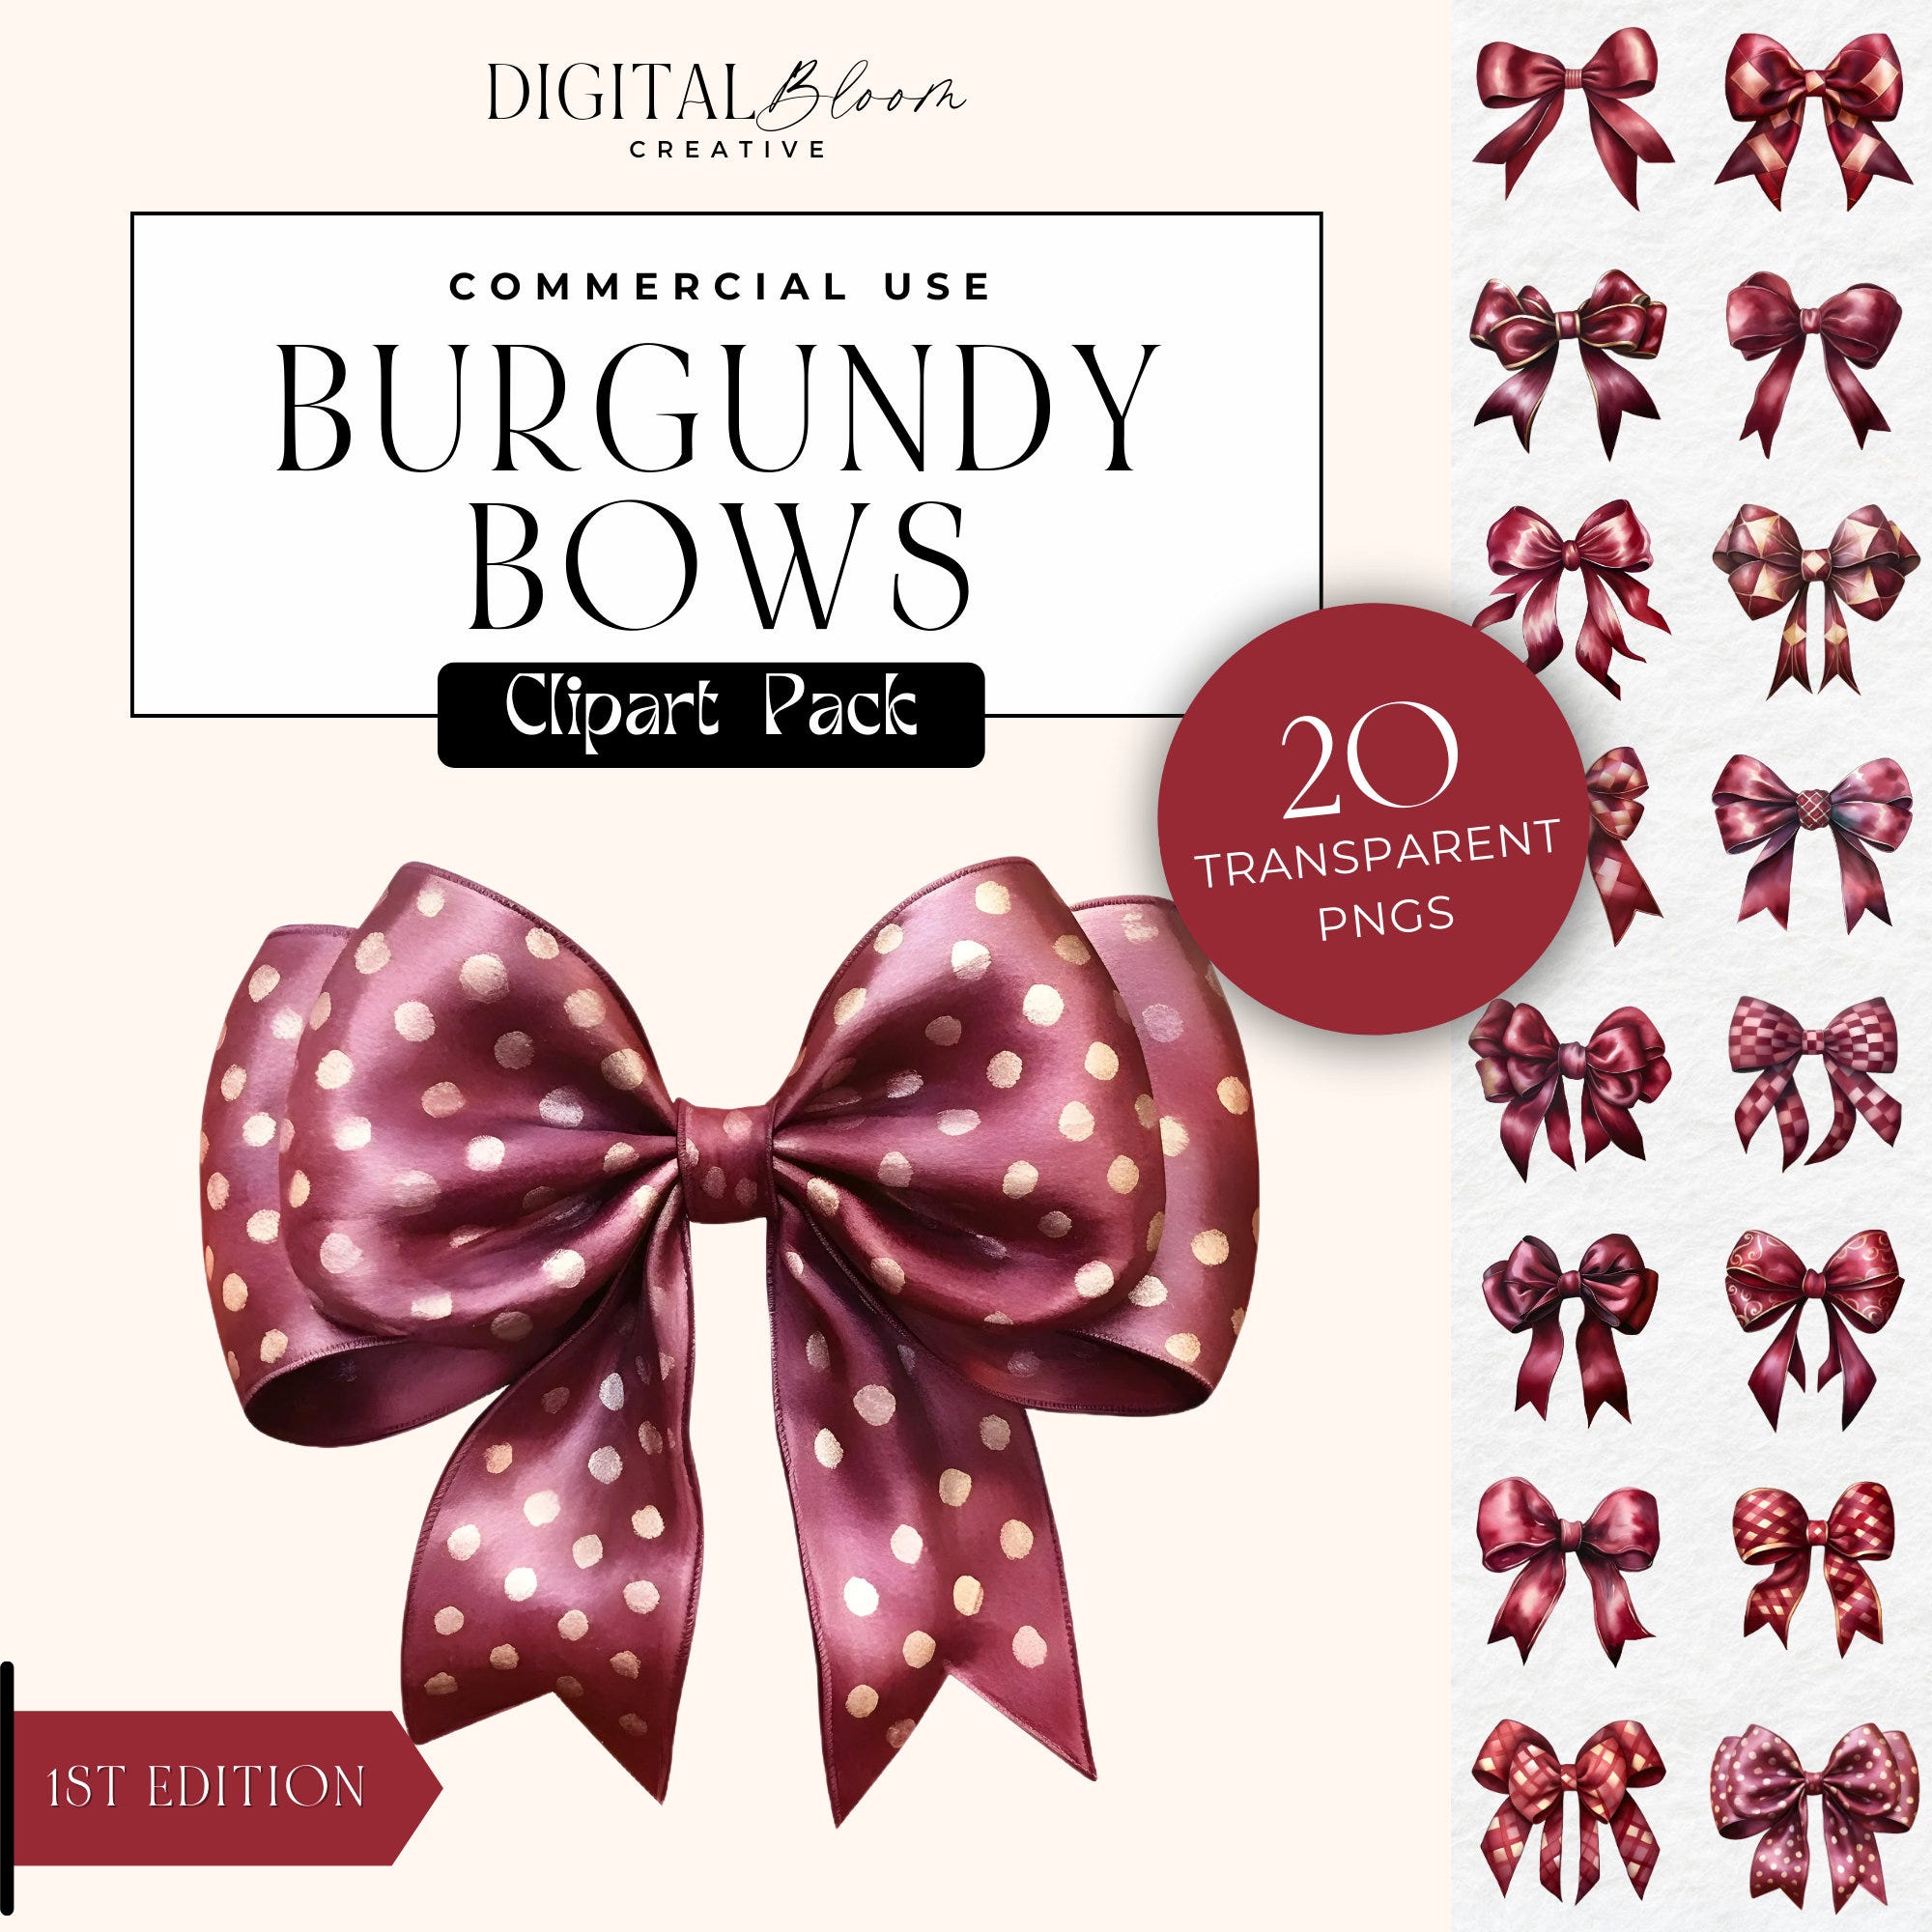 Ribbon Bow Clipart Transparent png, Burgundy Red, Watercolor Coquette Bow, Digital Download, Scrapbook Wedding Clip Art, Commercial Use